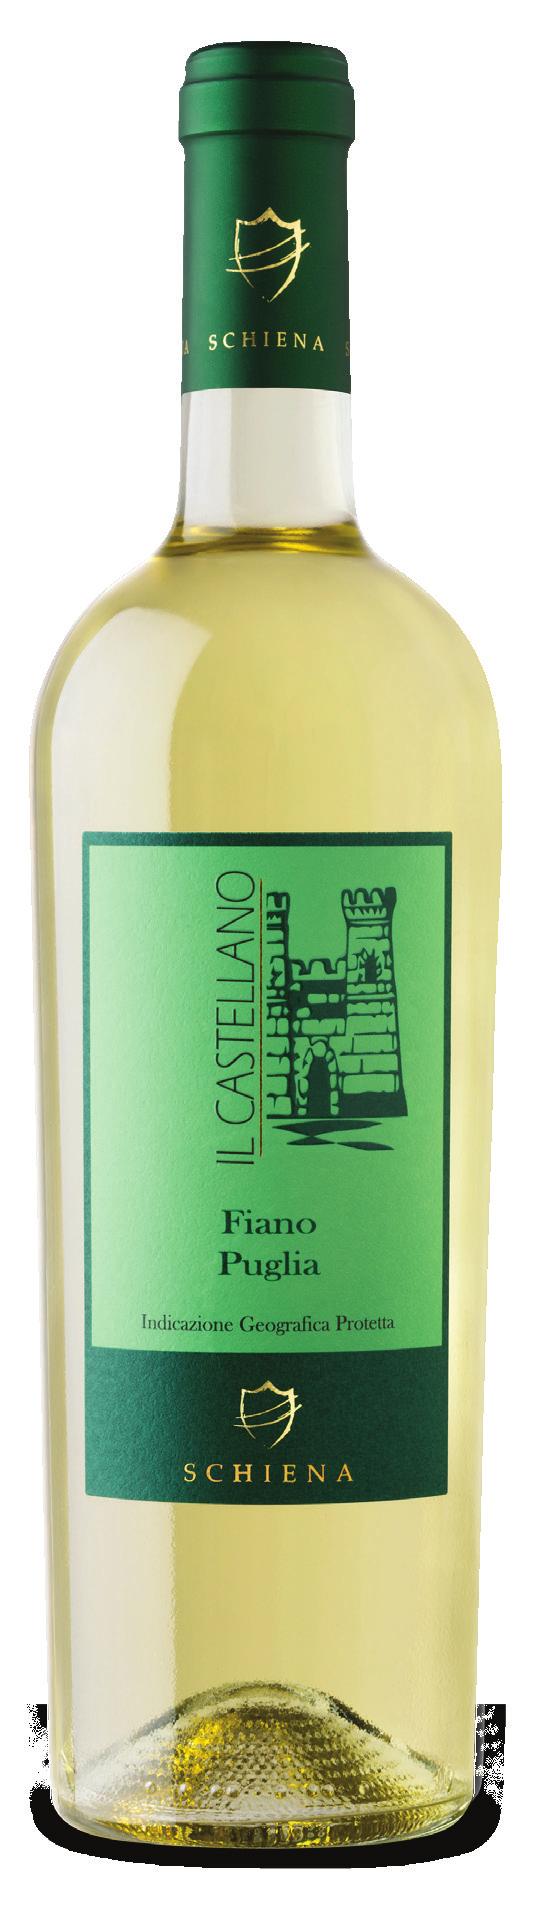 il castellano fiano puglia igp TRADITION 100% Fiano. Francavilla Fontana (Br). Guyot. Last ten days of August. Hand harvest. The grapes are destemmed, crushed and gently pressed.